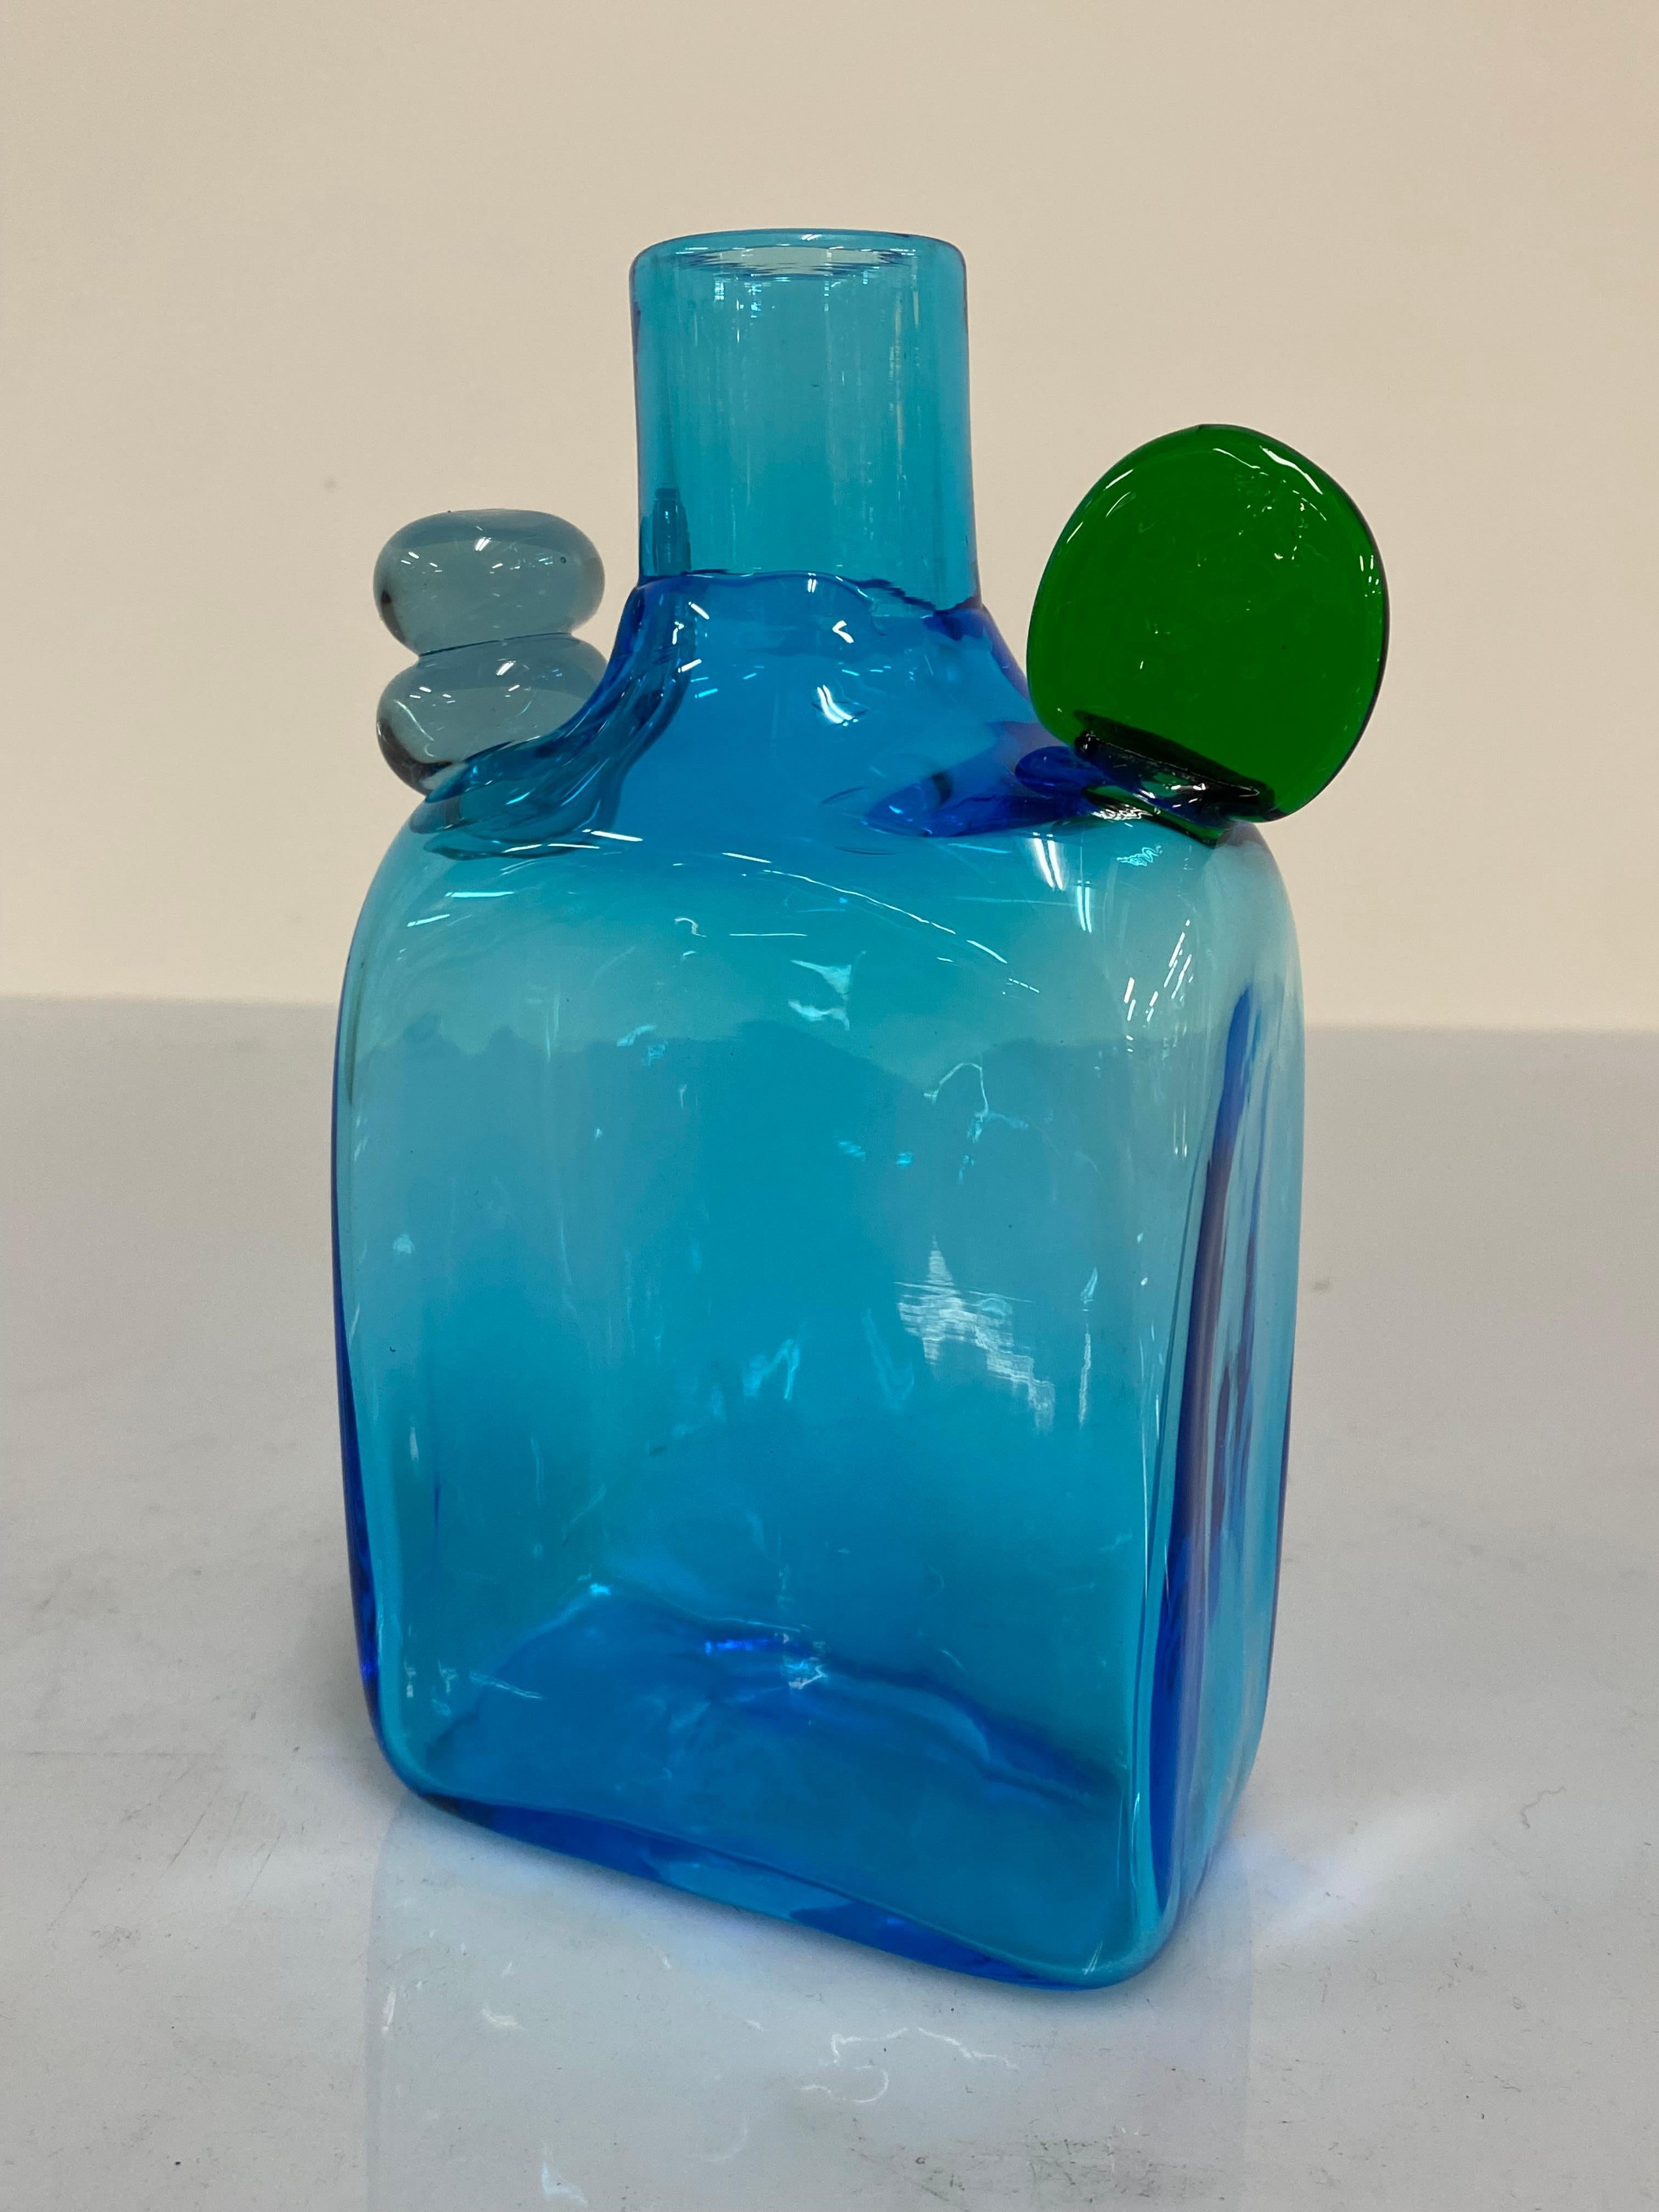 This vibrant blue Pampula bottle with green and clear glass details by Oiva Toikka is a perfect decoration on it's own. The overall condition of this playful art piece is very good and it comes with the Oiva Toikka Nuutajärvi Notsjö inscription.